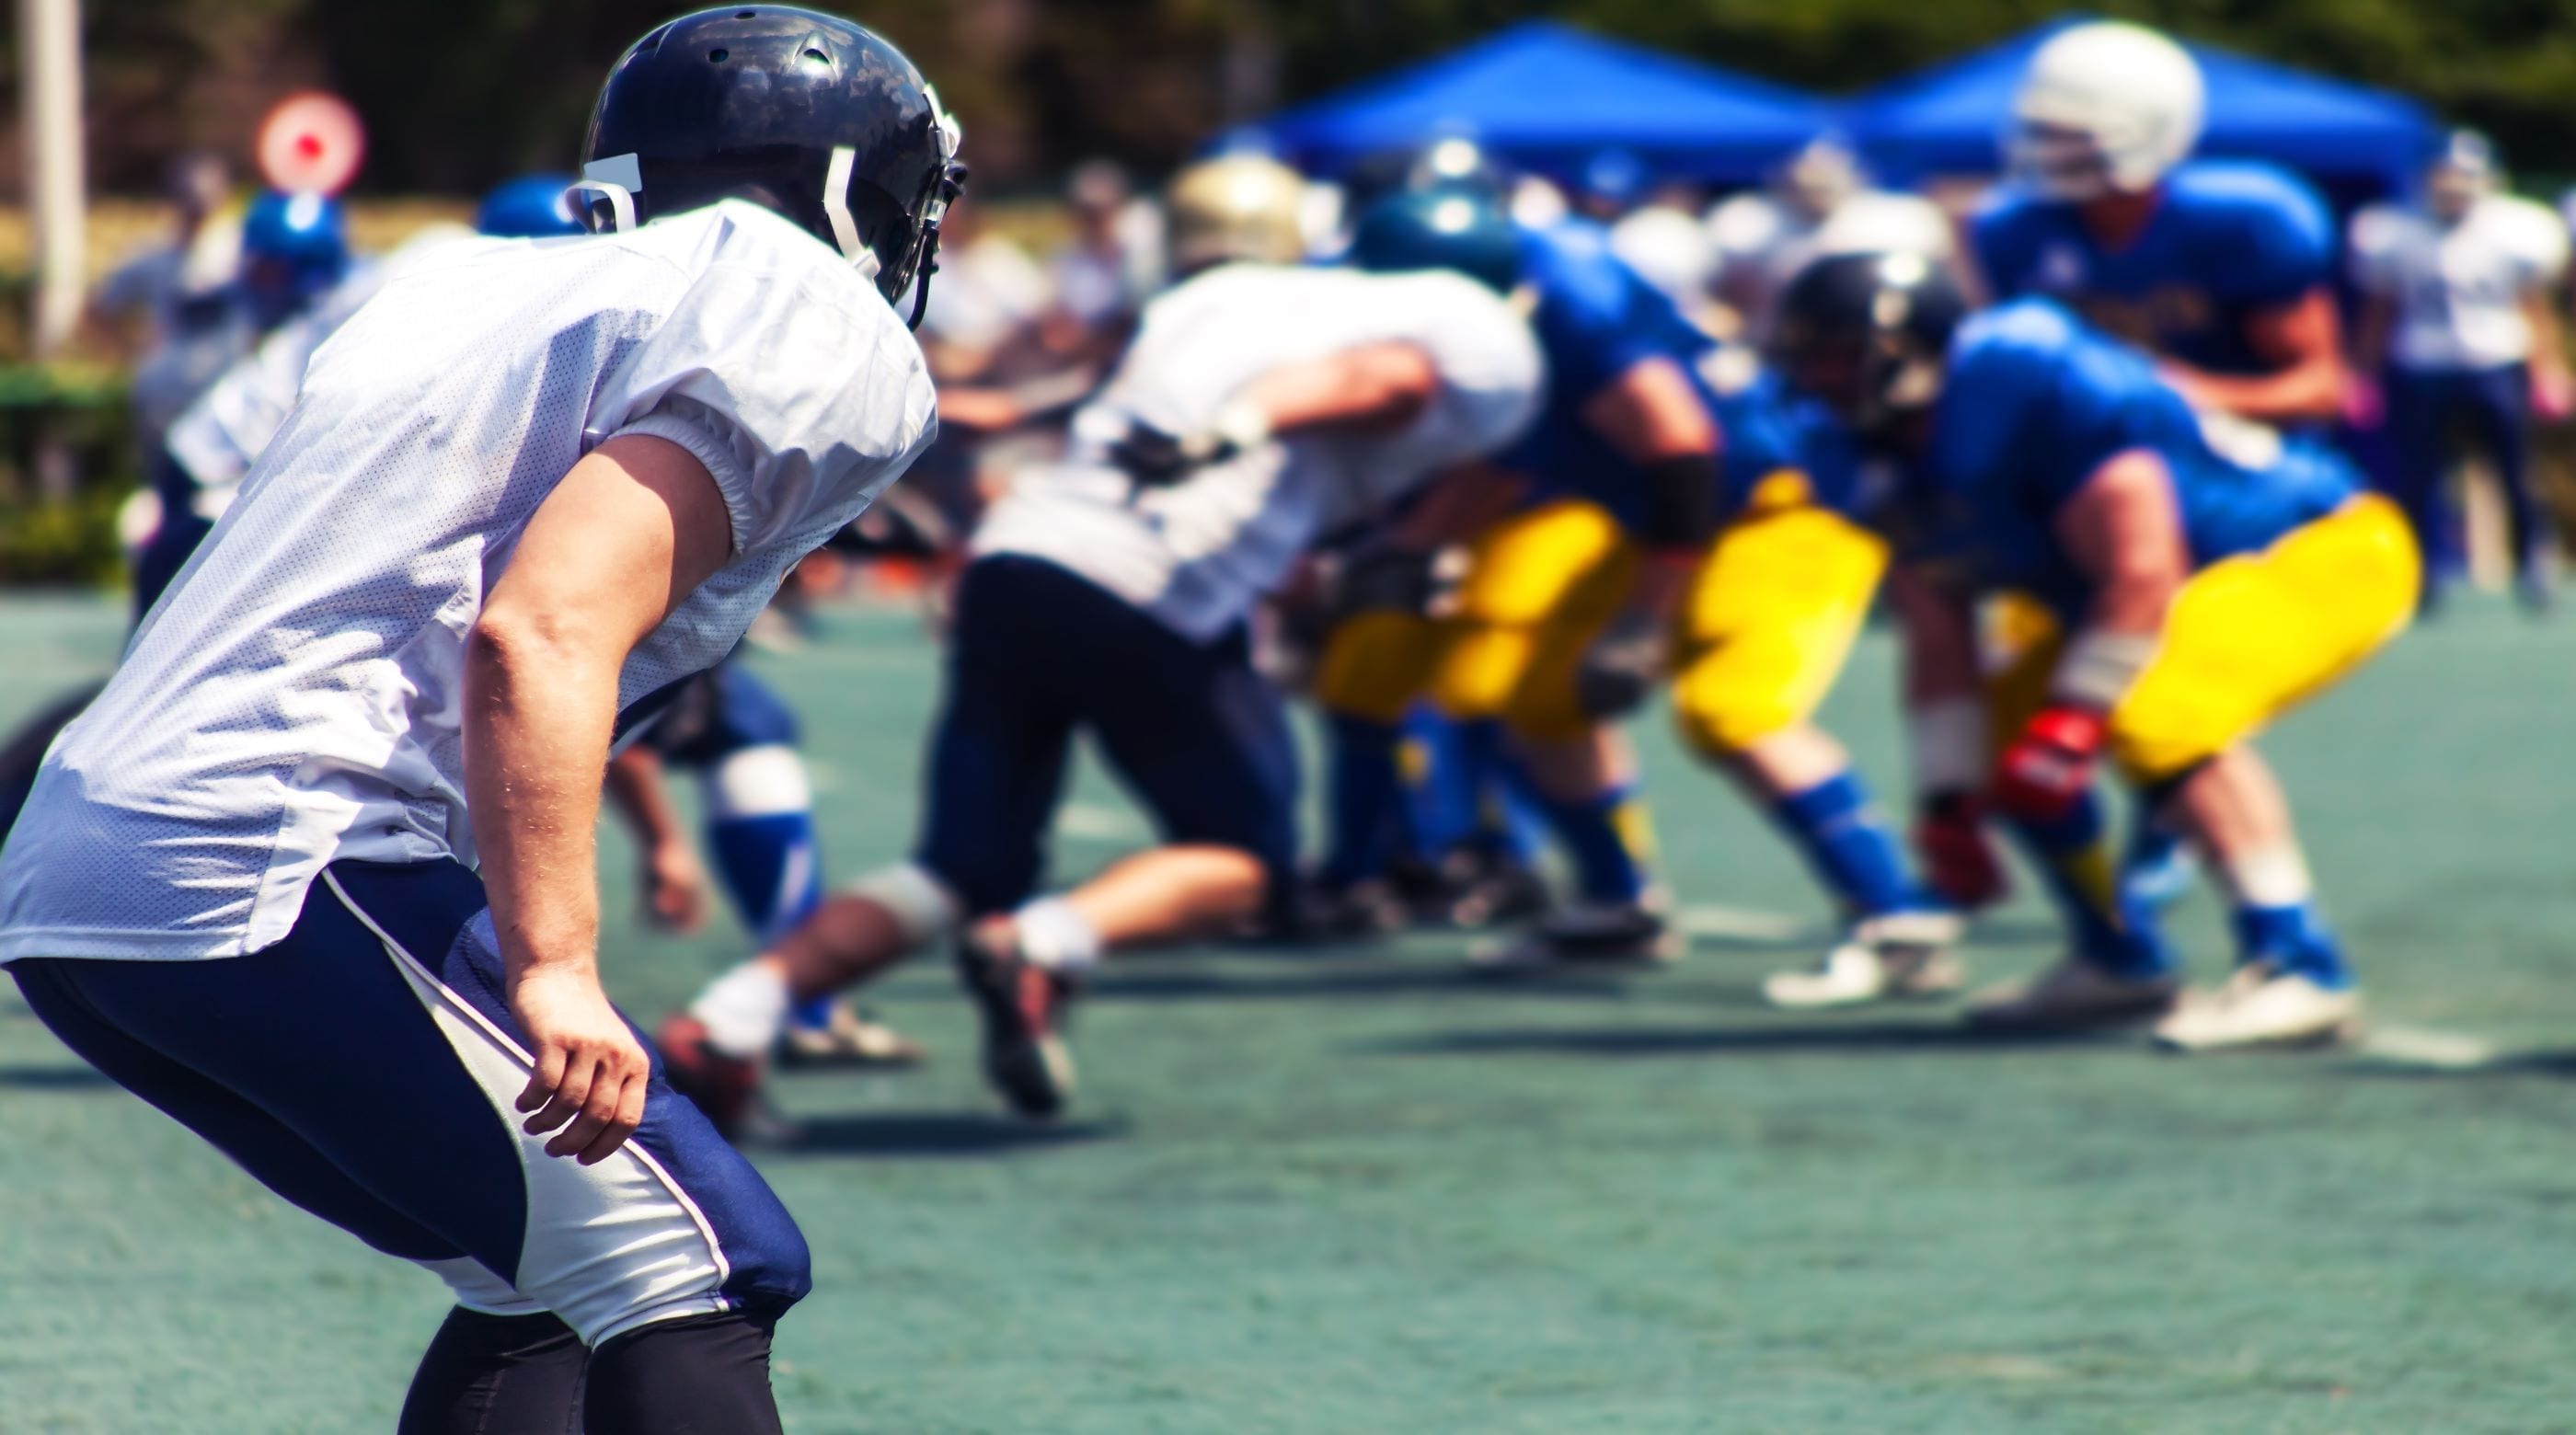 Exercise Strategies to Prevent Football Injuries